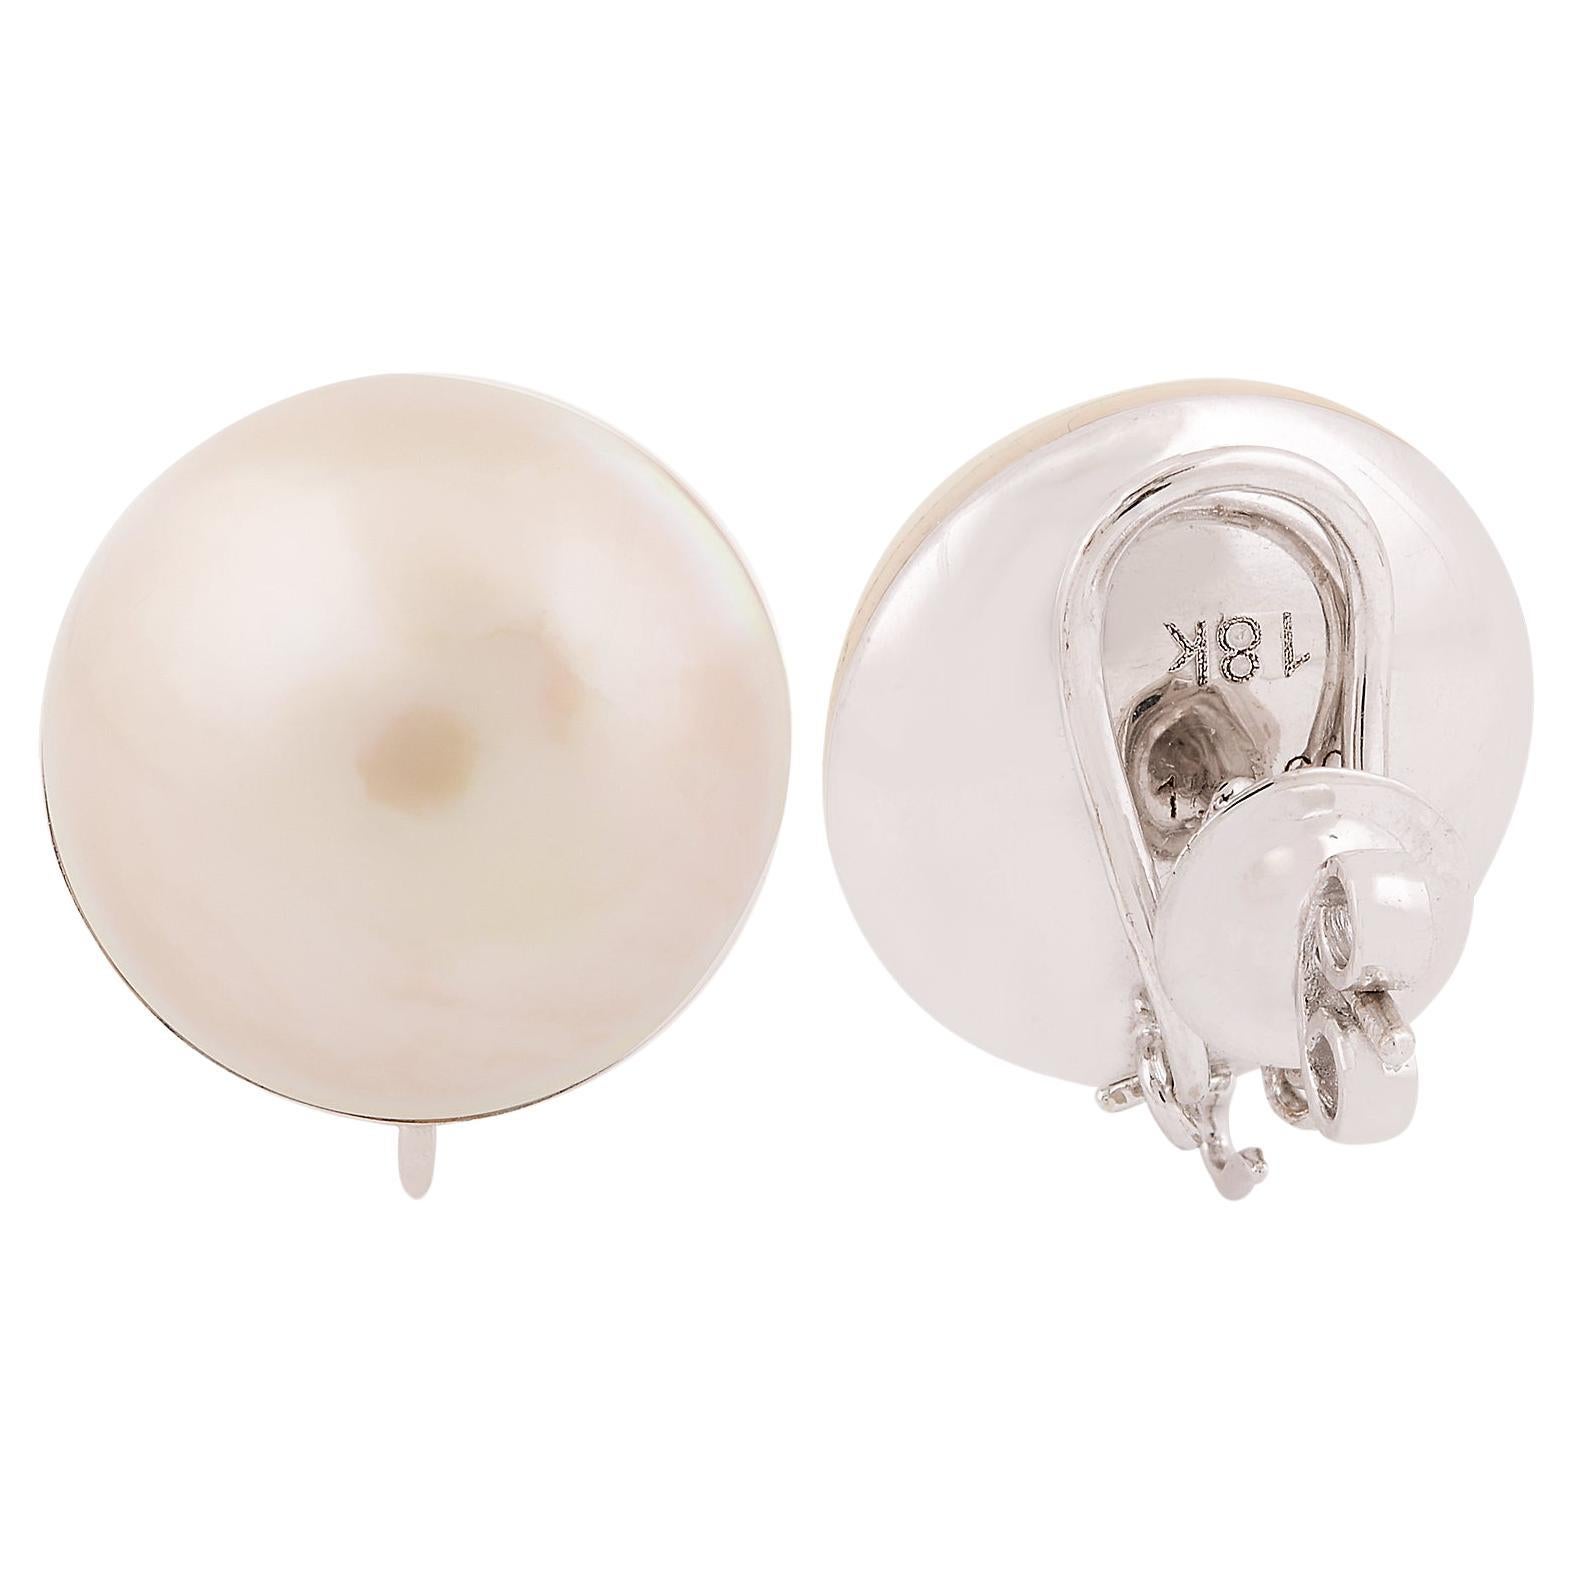 Natural 23.86 Carat Pearl Gemstone Stud Earrings Solid 18k White Gold Jewelry